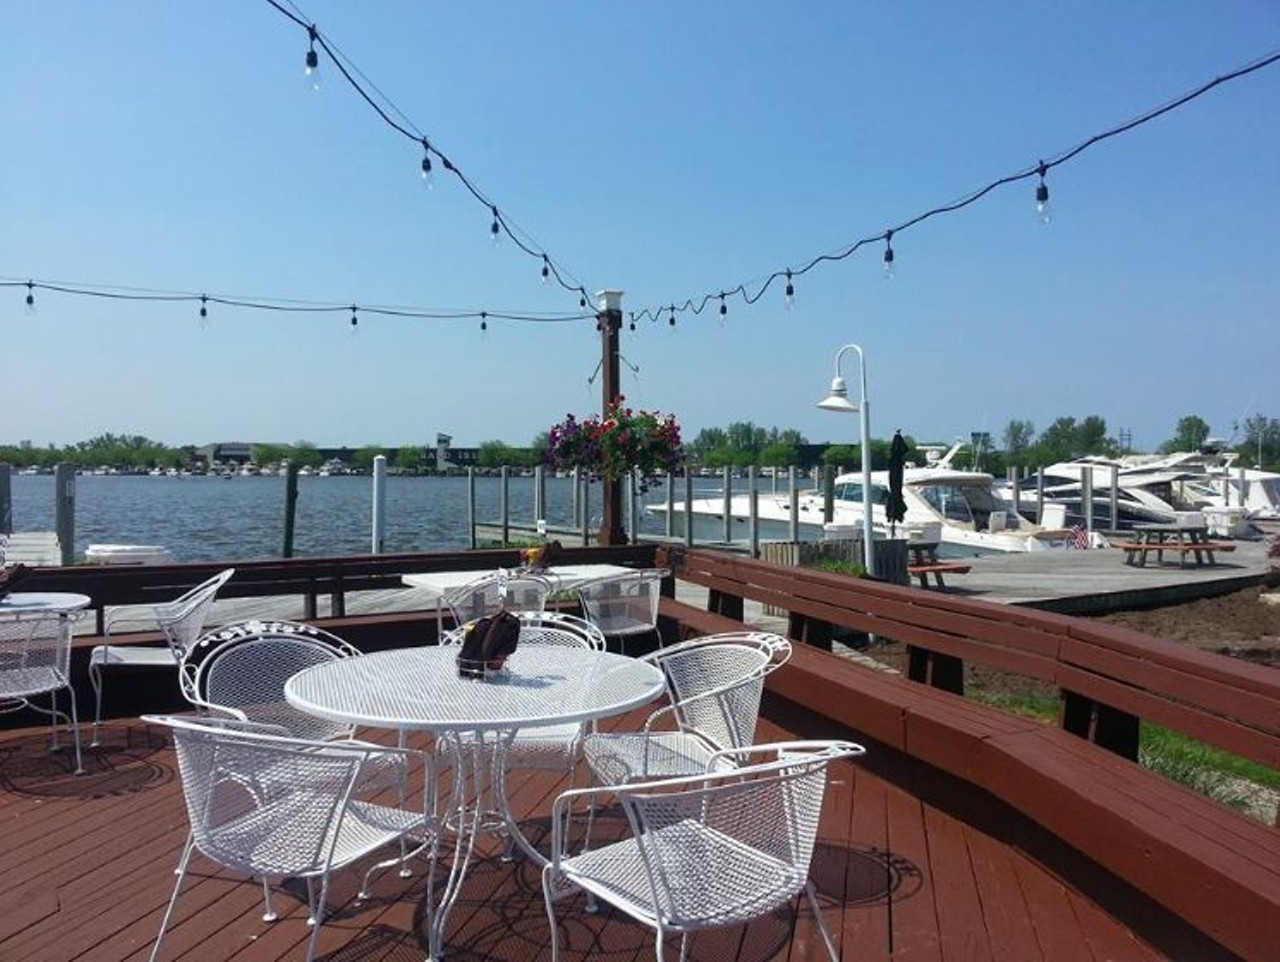 Jack&#146;s Waterfront Bistro + Bar
940 W. Savidge St., Spring Lake; 616-846-1370
In addition to delicious entrees, this waterfront restaurant has an outdoor tiki bar where you can enjoy their signature Rum Bomber or indulge in their happy hours at various times during the week. Jack&#146;s hosts a comedy night every Thursday and live entertainment on the outdoor deck during the warmer months.
Photo: Facebook, Jack's Waterfront Bistro + Bar